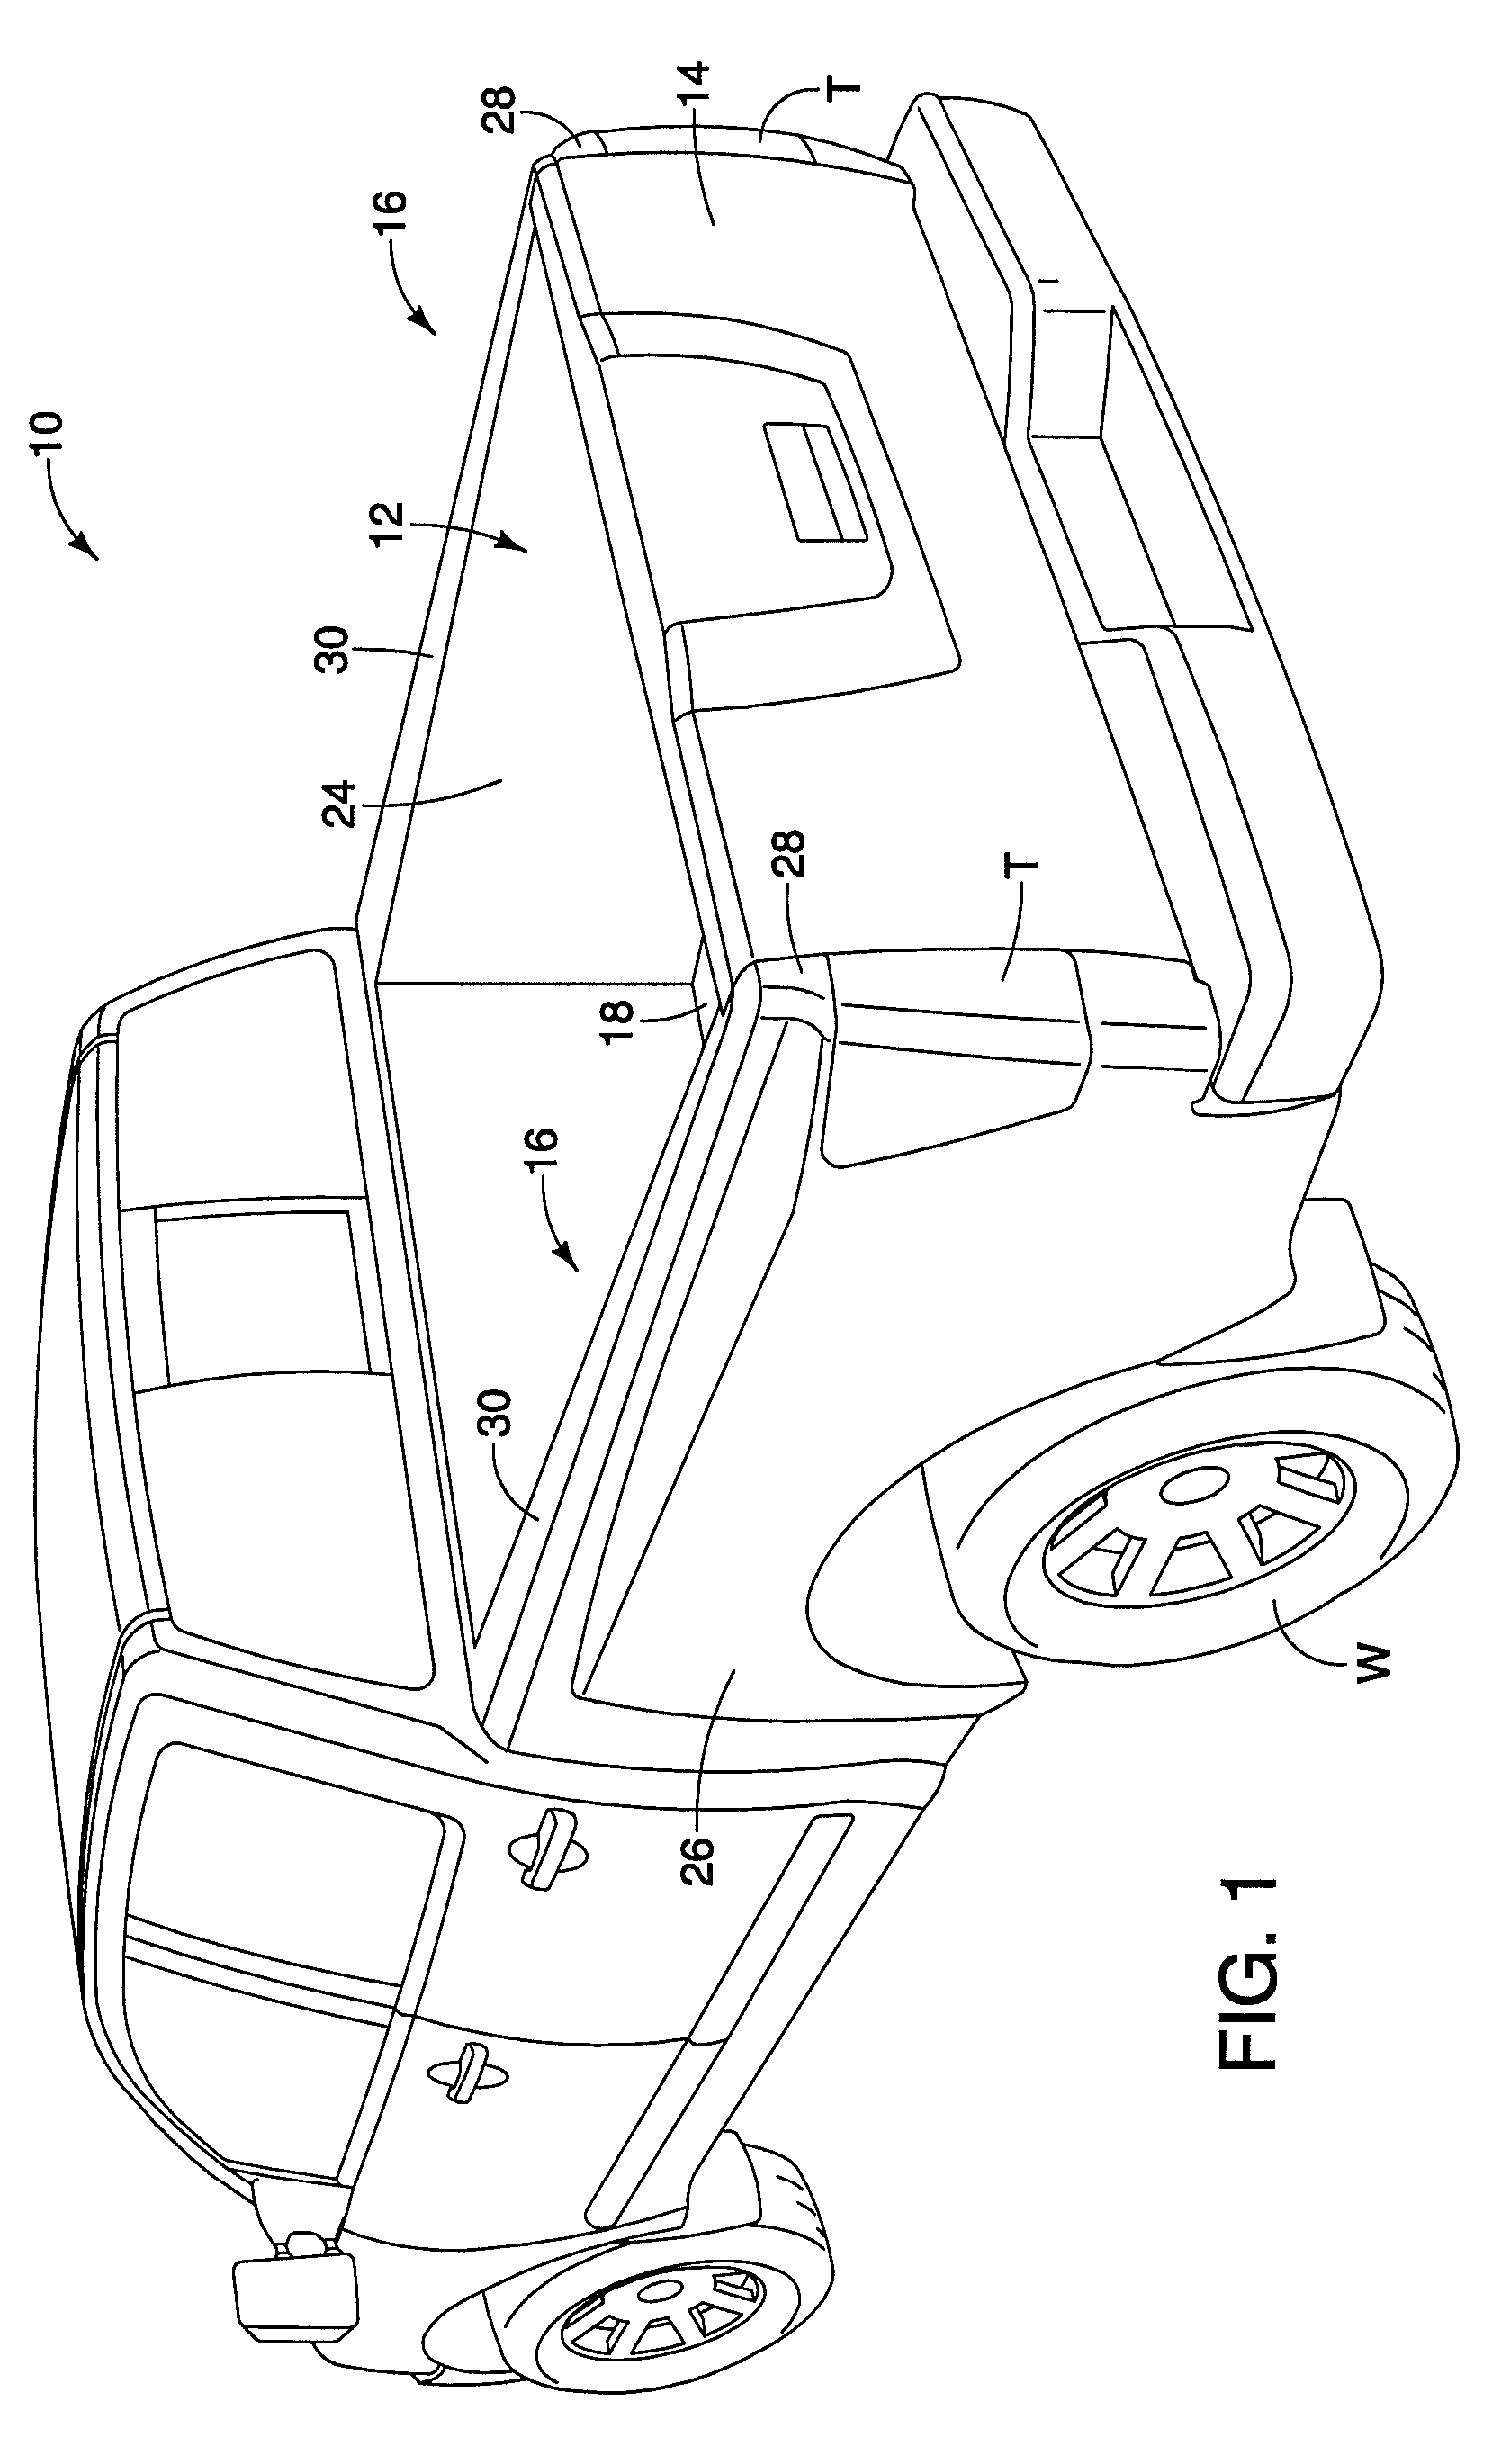 Vehicle cargo sidewall structure